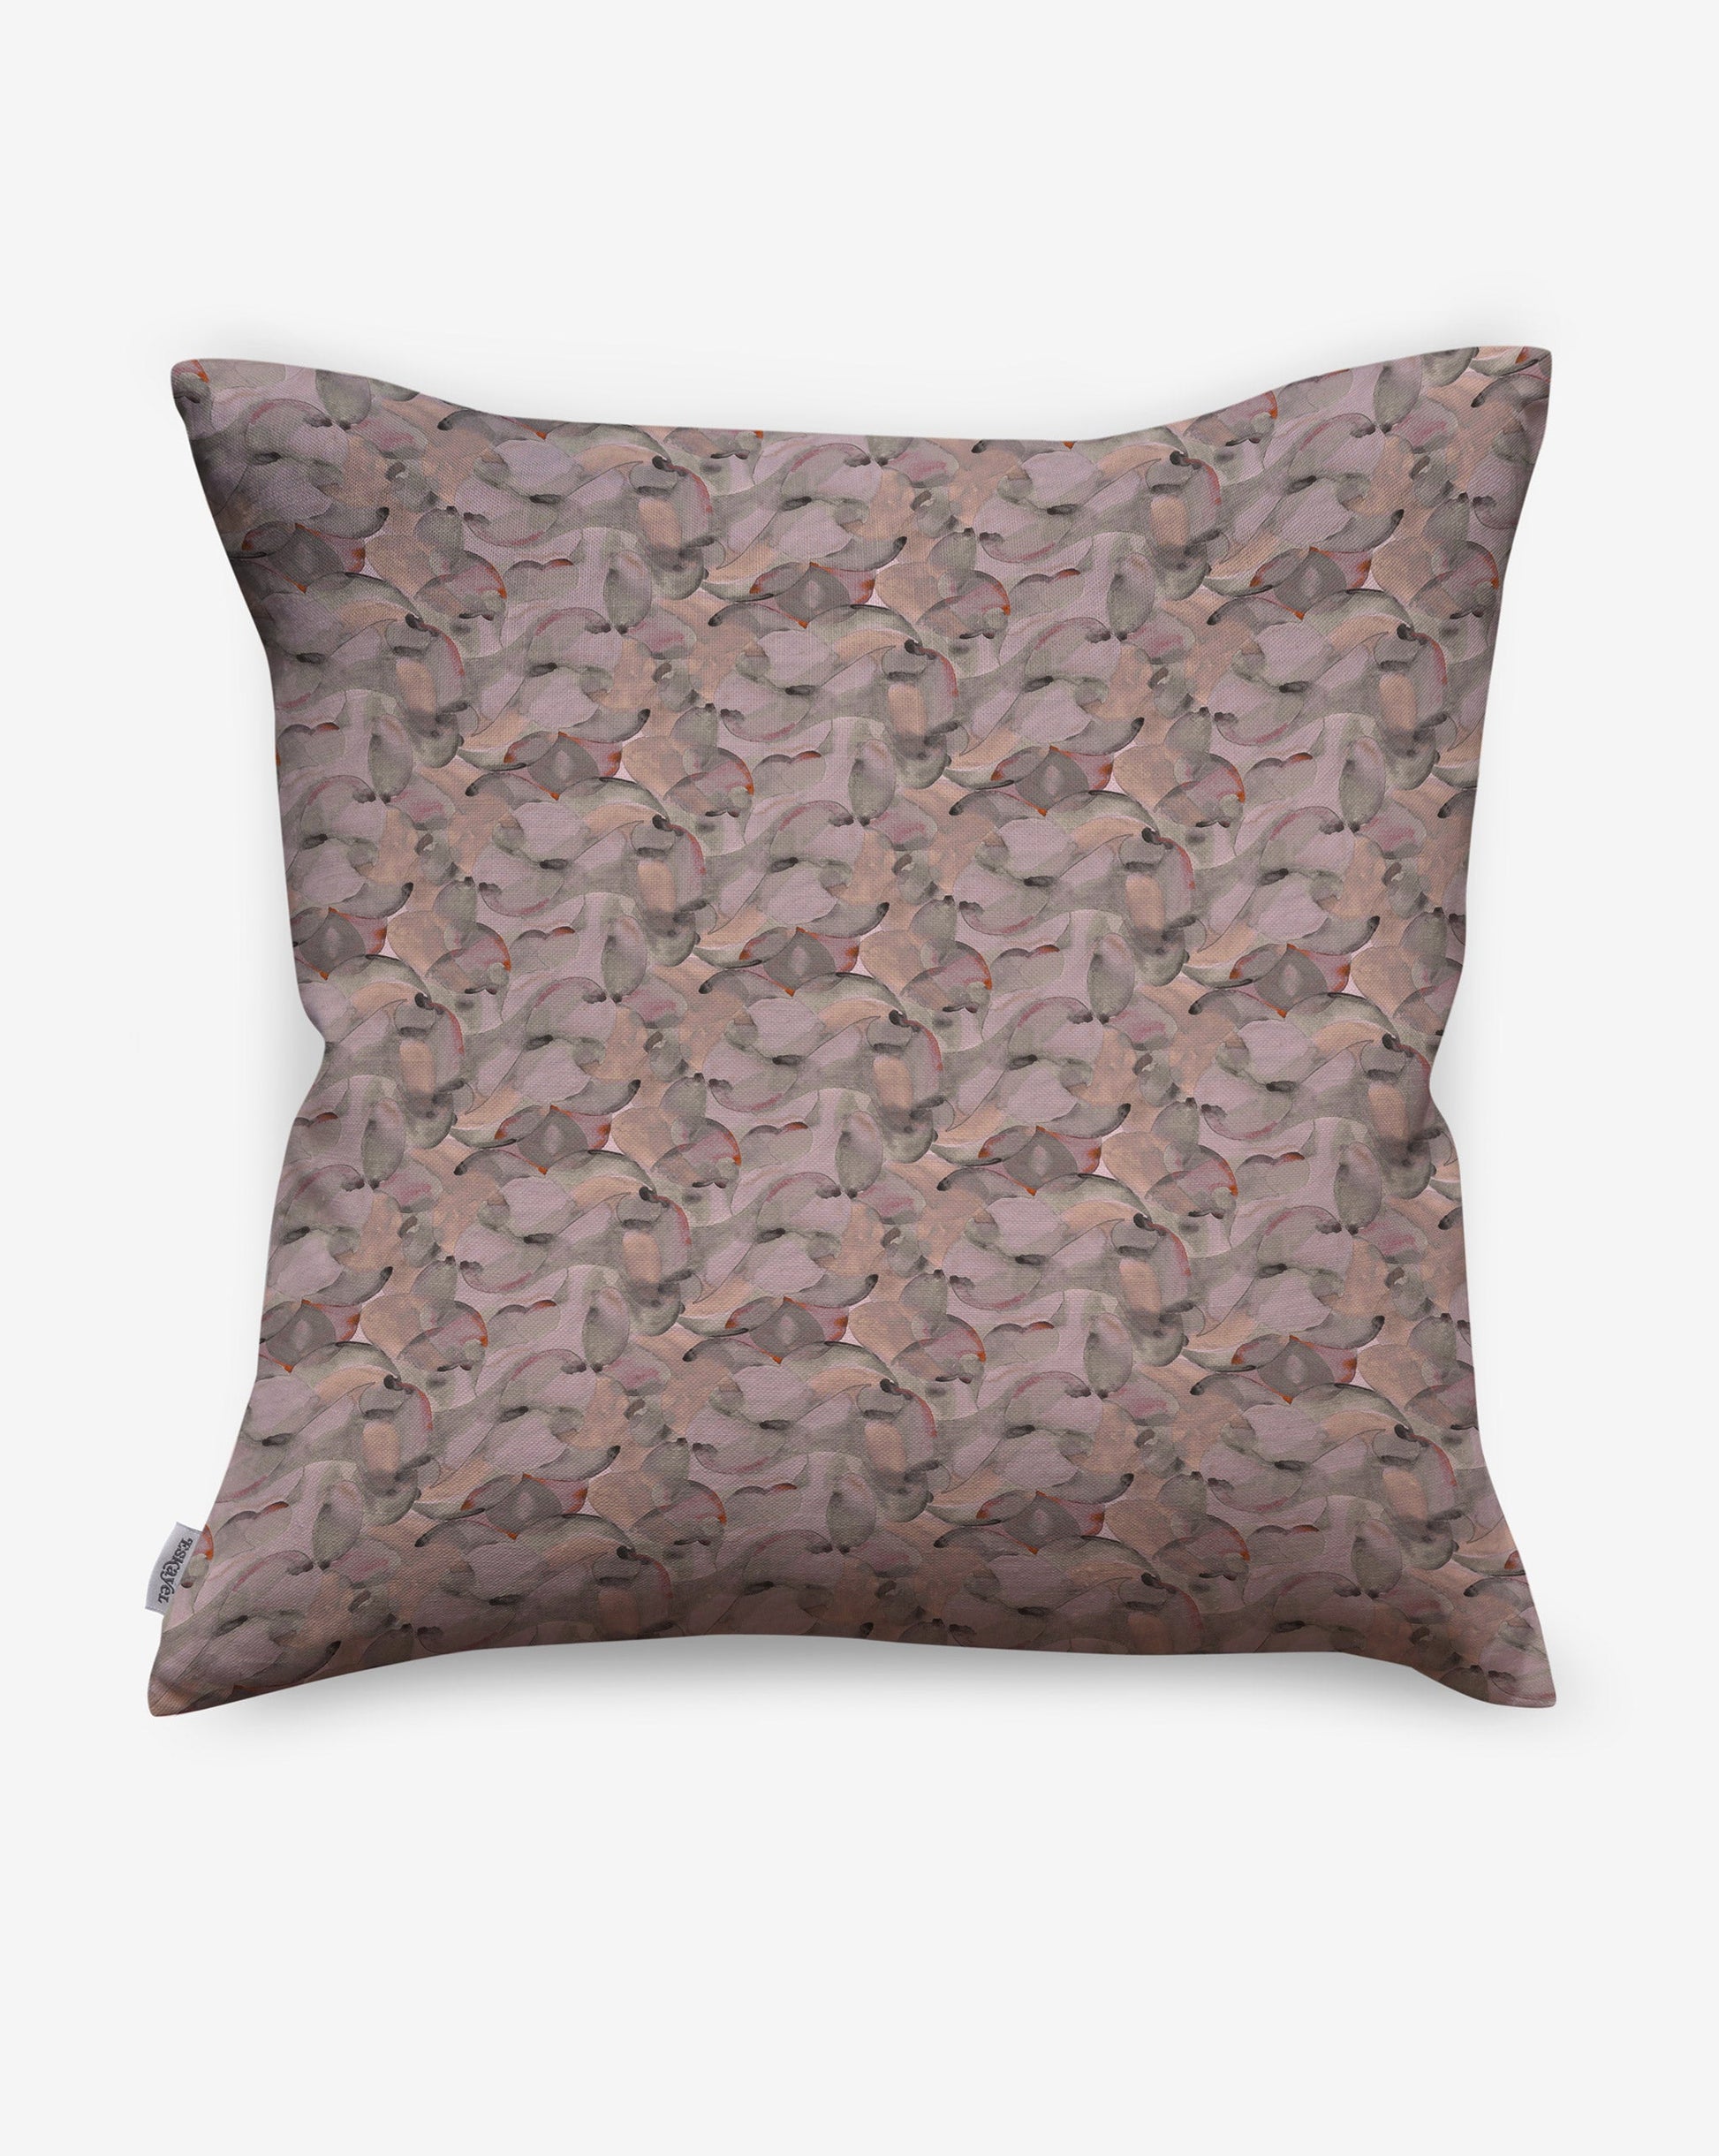 Orbs is an abstract fabric print from Eskayel available as luxe pillows in multicolor Mauve.